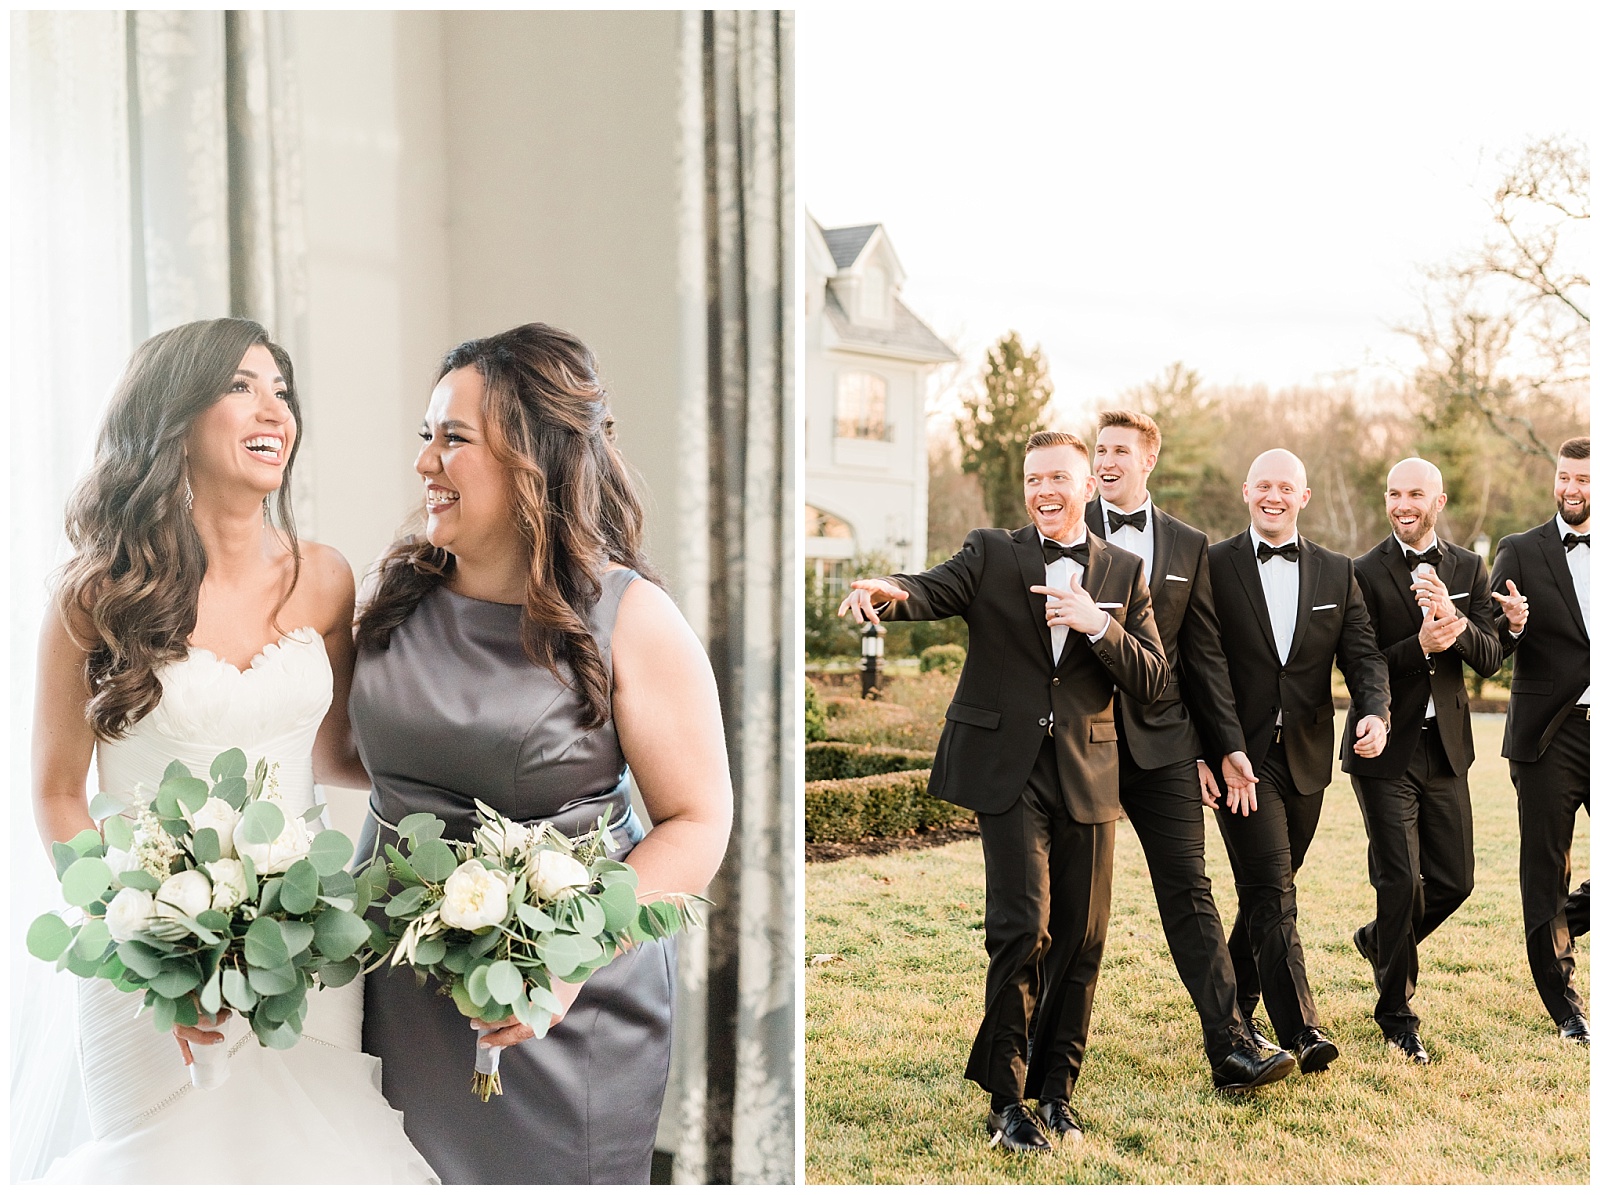 Park Chateau Wedding, Photographer, New Jersey, NJ, Winter, Bridal Party, Maid of Honor, Groomsmen